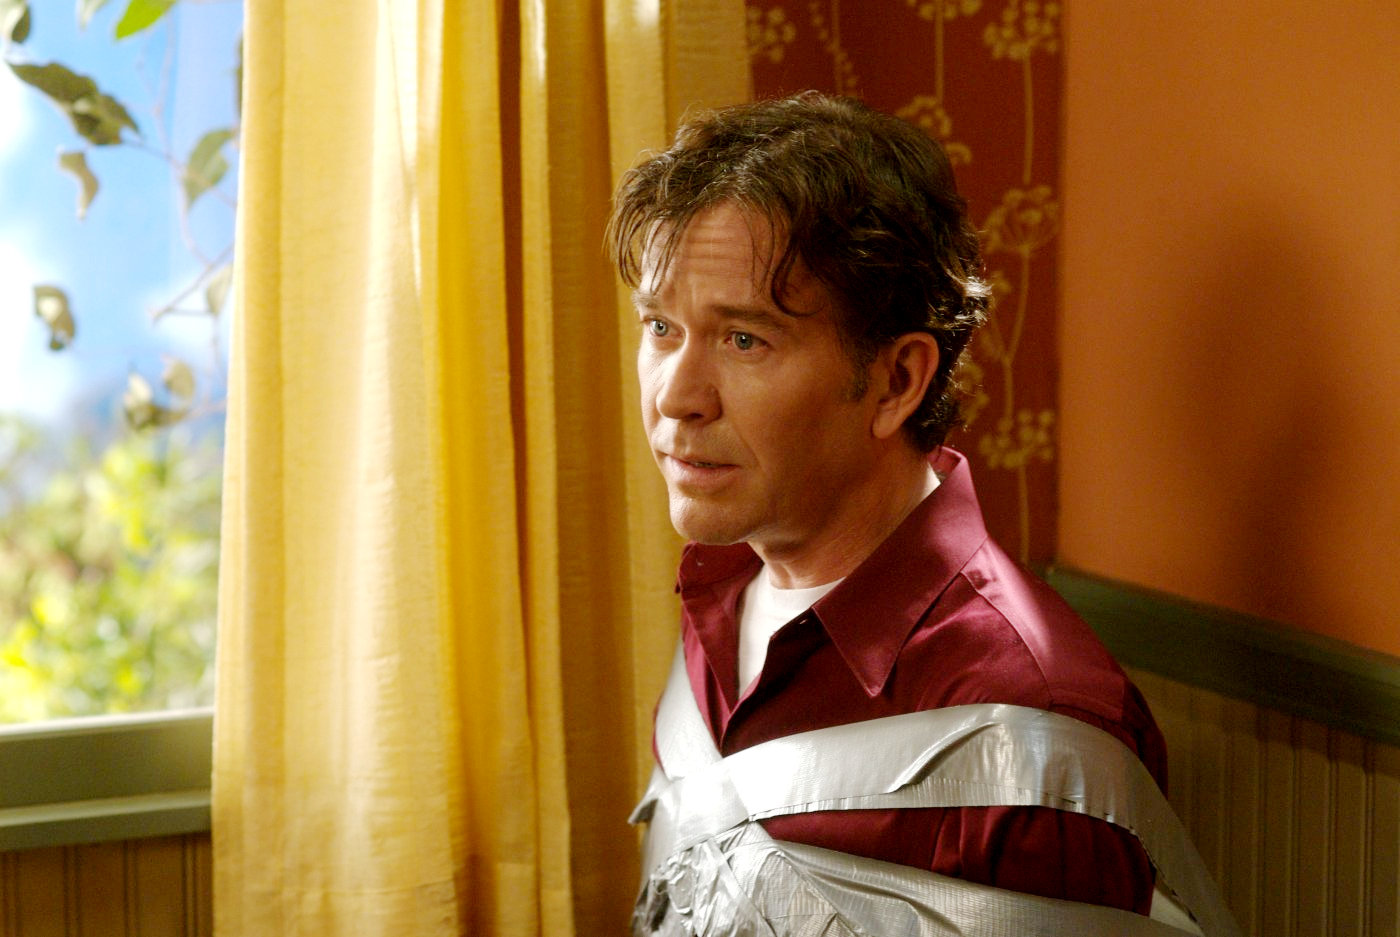 Timothy Hutton in Magnolia Pictures' Serious Moonlight (2009)